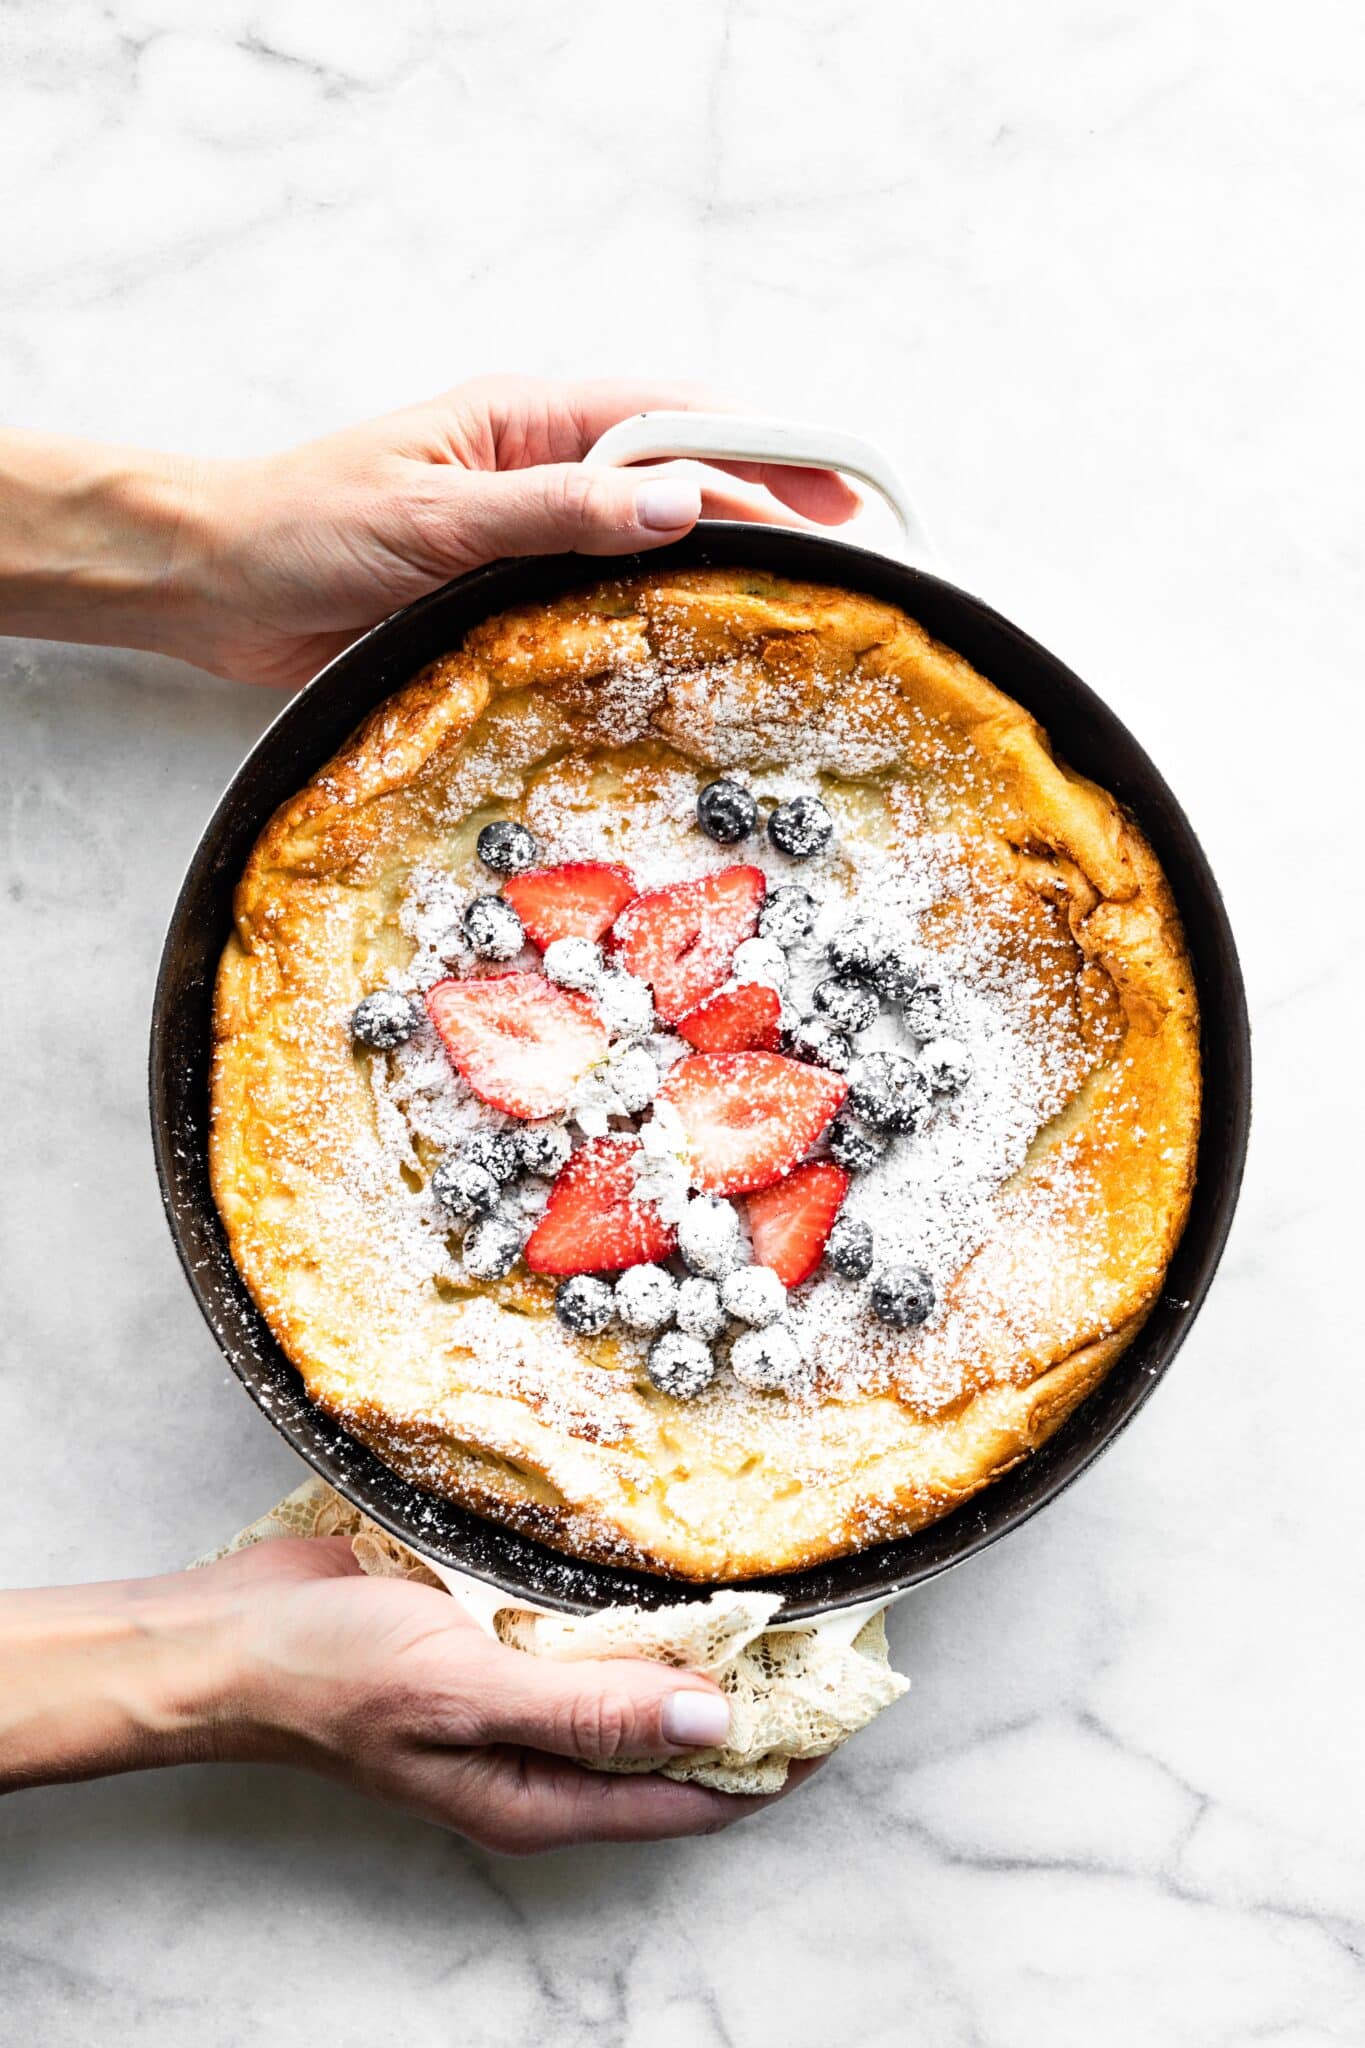 A woman's hands holding a cast iron pan of Swedish Pancakes topped with berries.